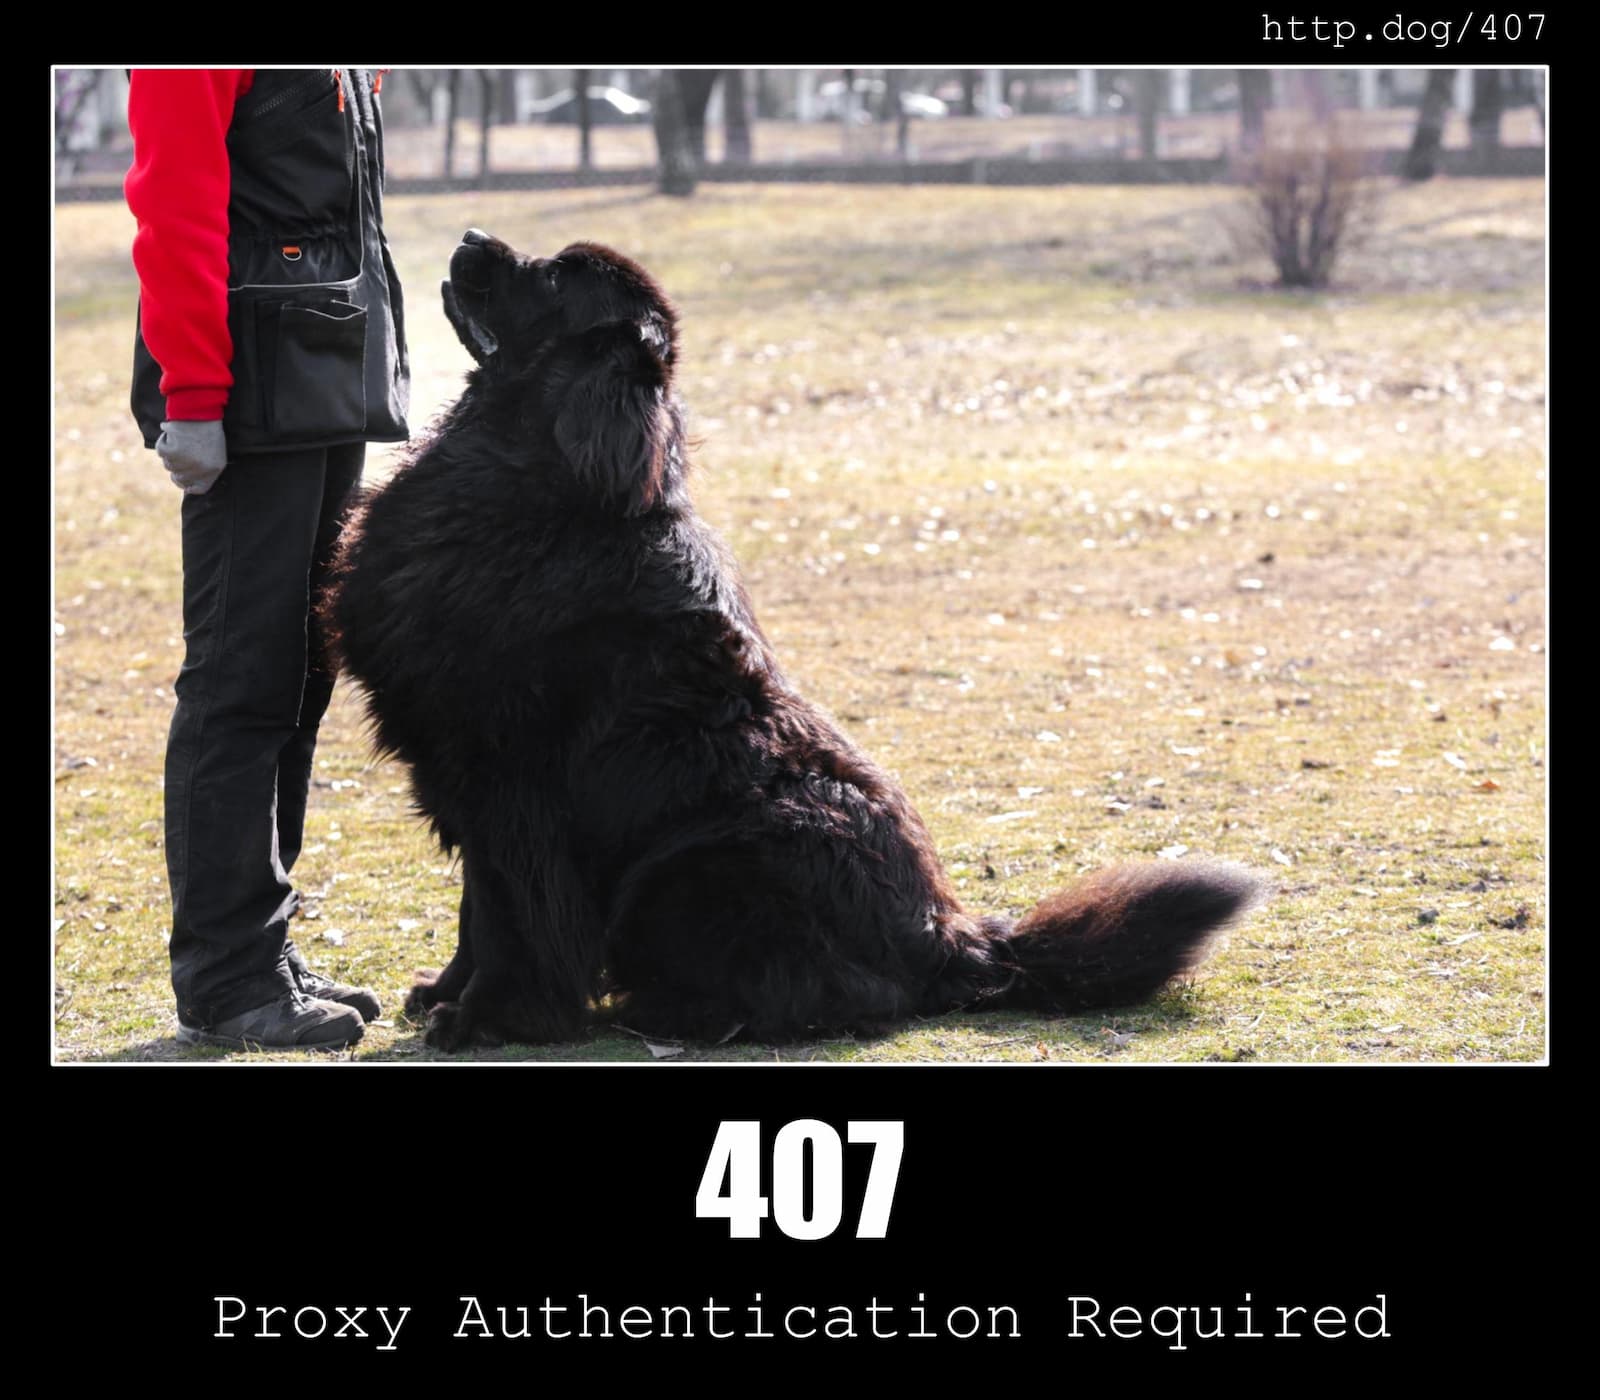 HTTP Status Code 407 Proxy Authentication Required & Dogs